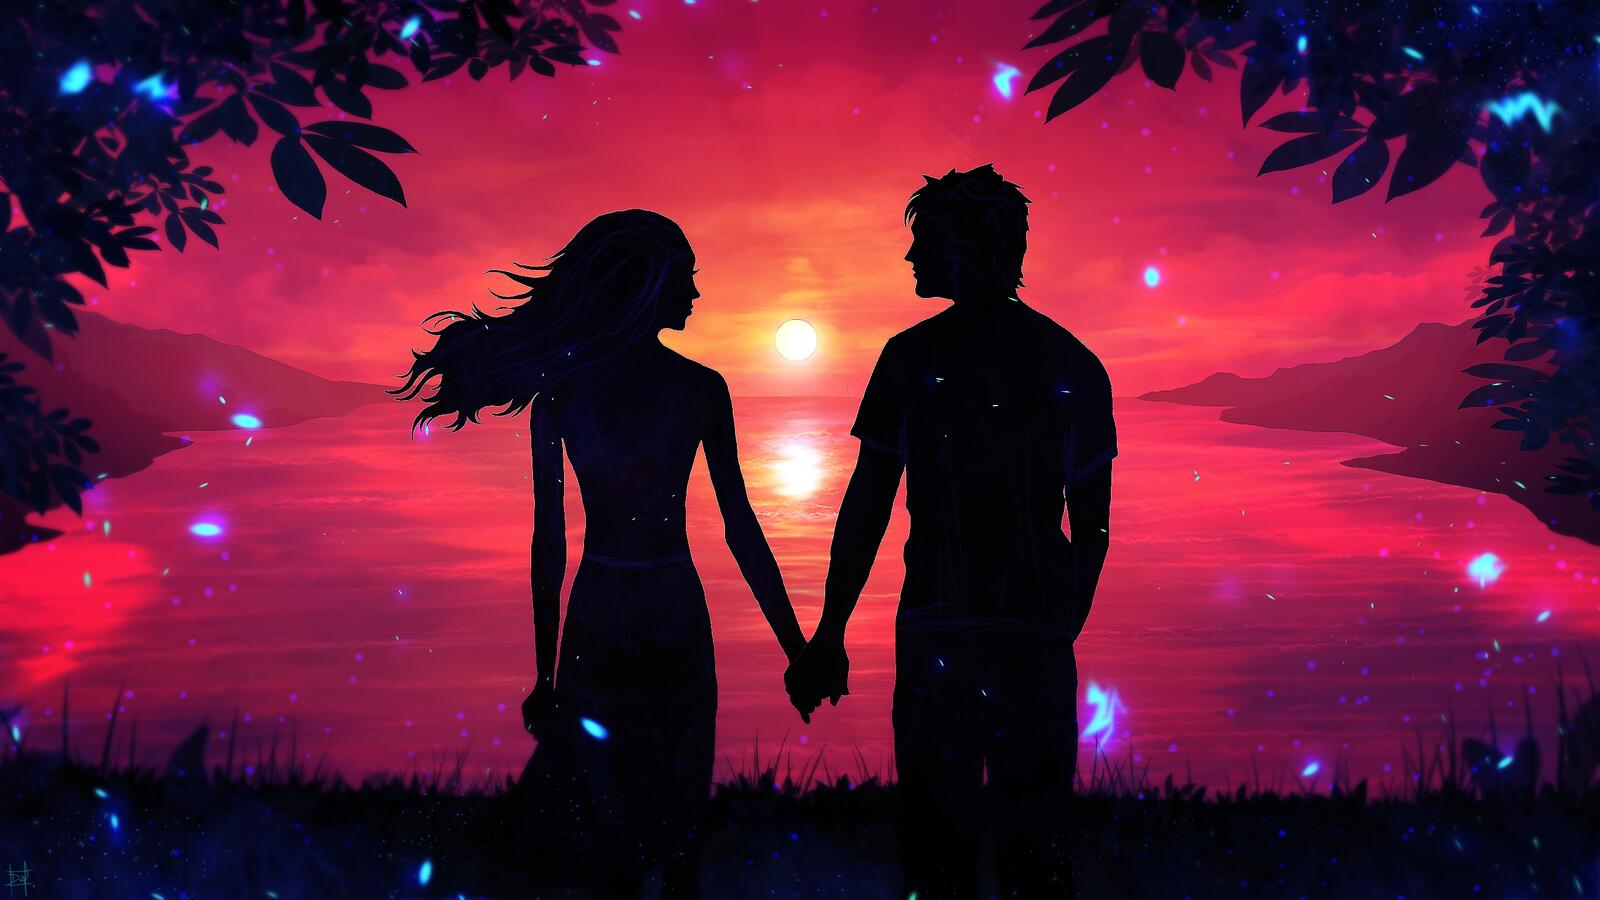 Wallpapers romantic couple sunset picturesque on the desktop